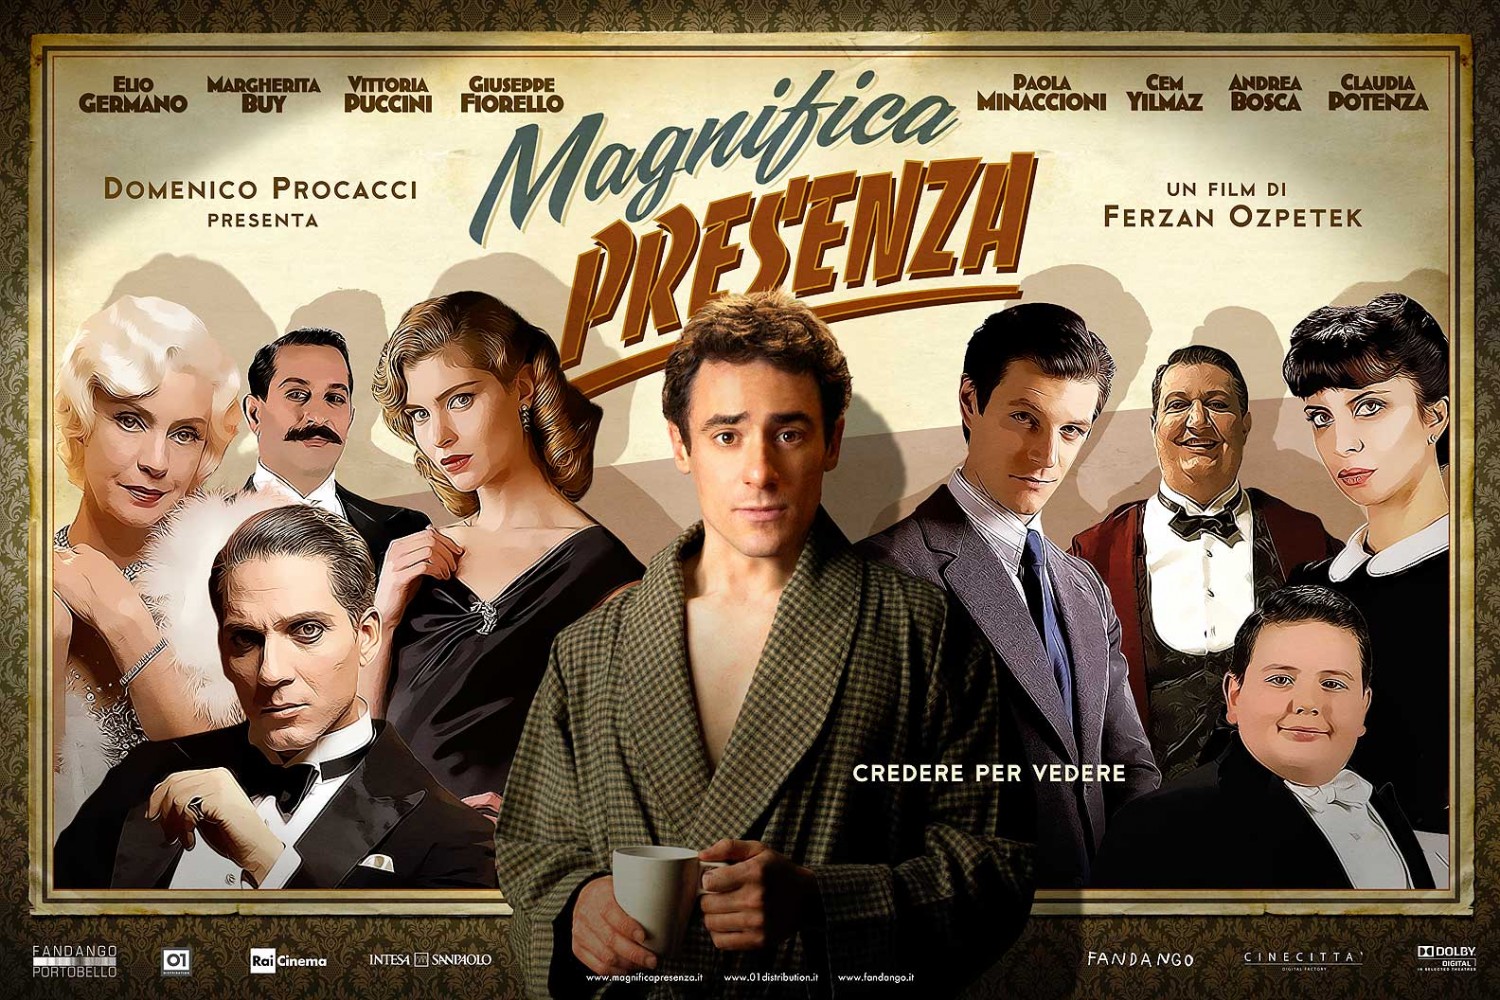 Extra Large Movie Poster Image for Magnifica Presenza (#6 of 8)